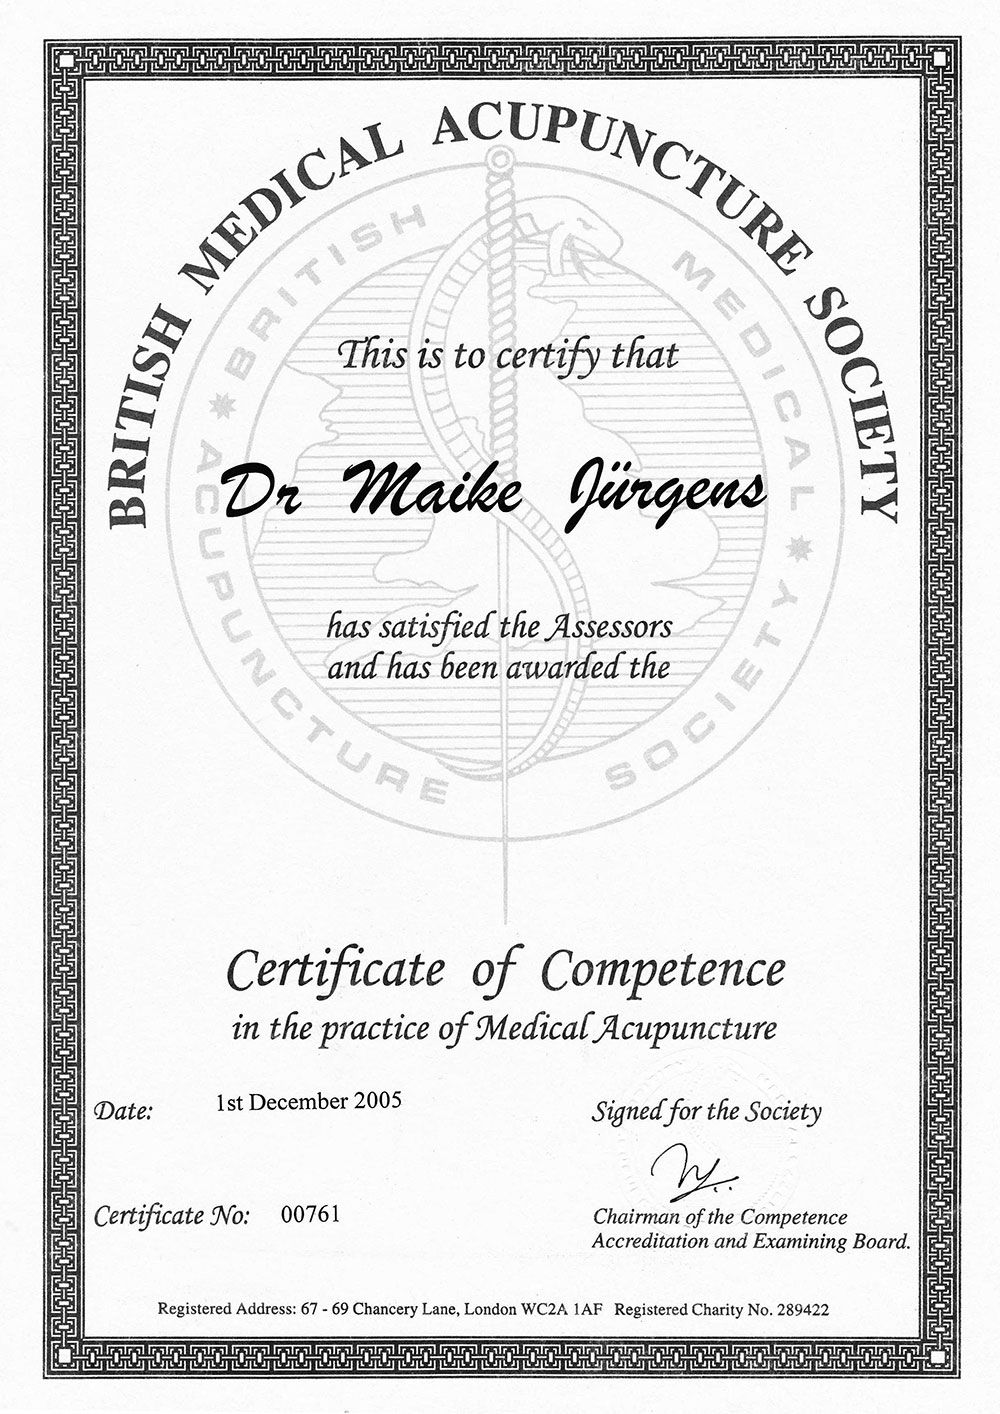 Certificate of Competence in the practice of Medical Acupuncture